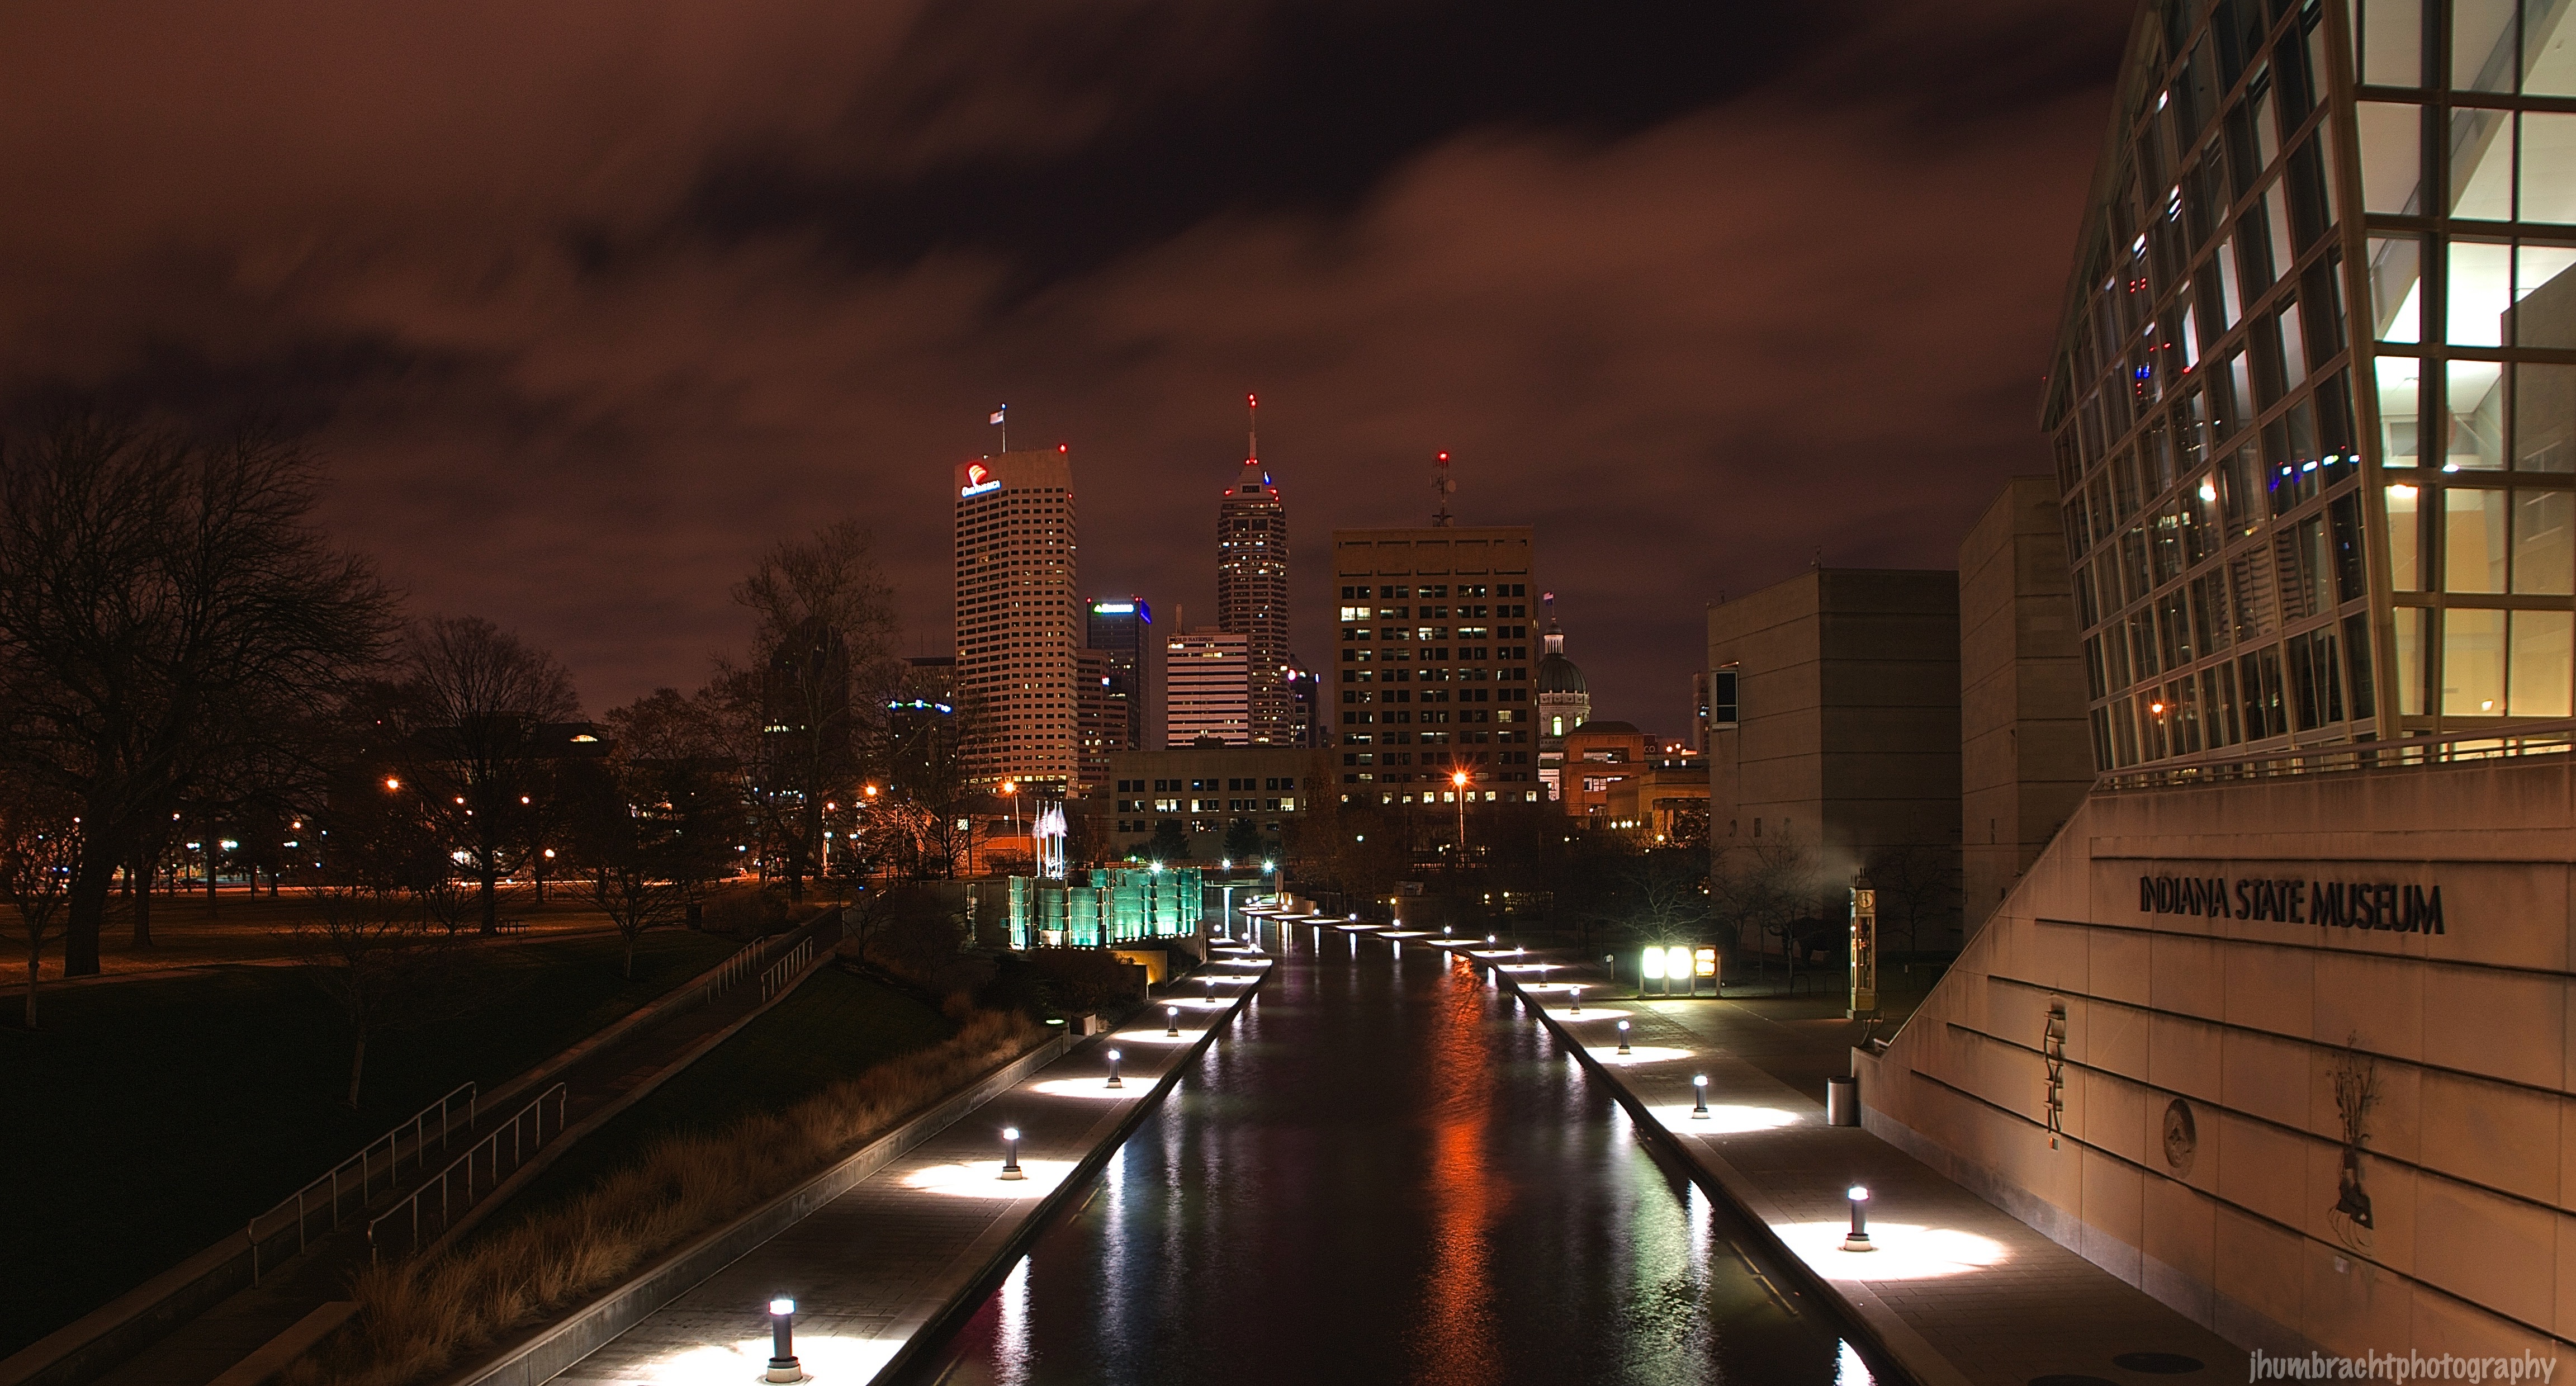 Indianapolis Skyline | Indiana State Museum | Canal Walk | Image By Indiana Architectural Photographer Jason Humbracht